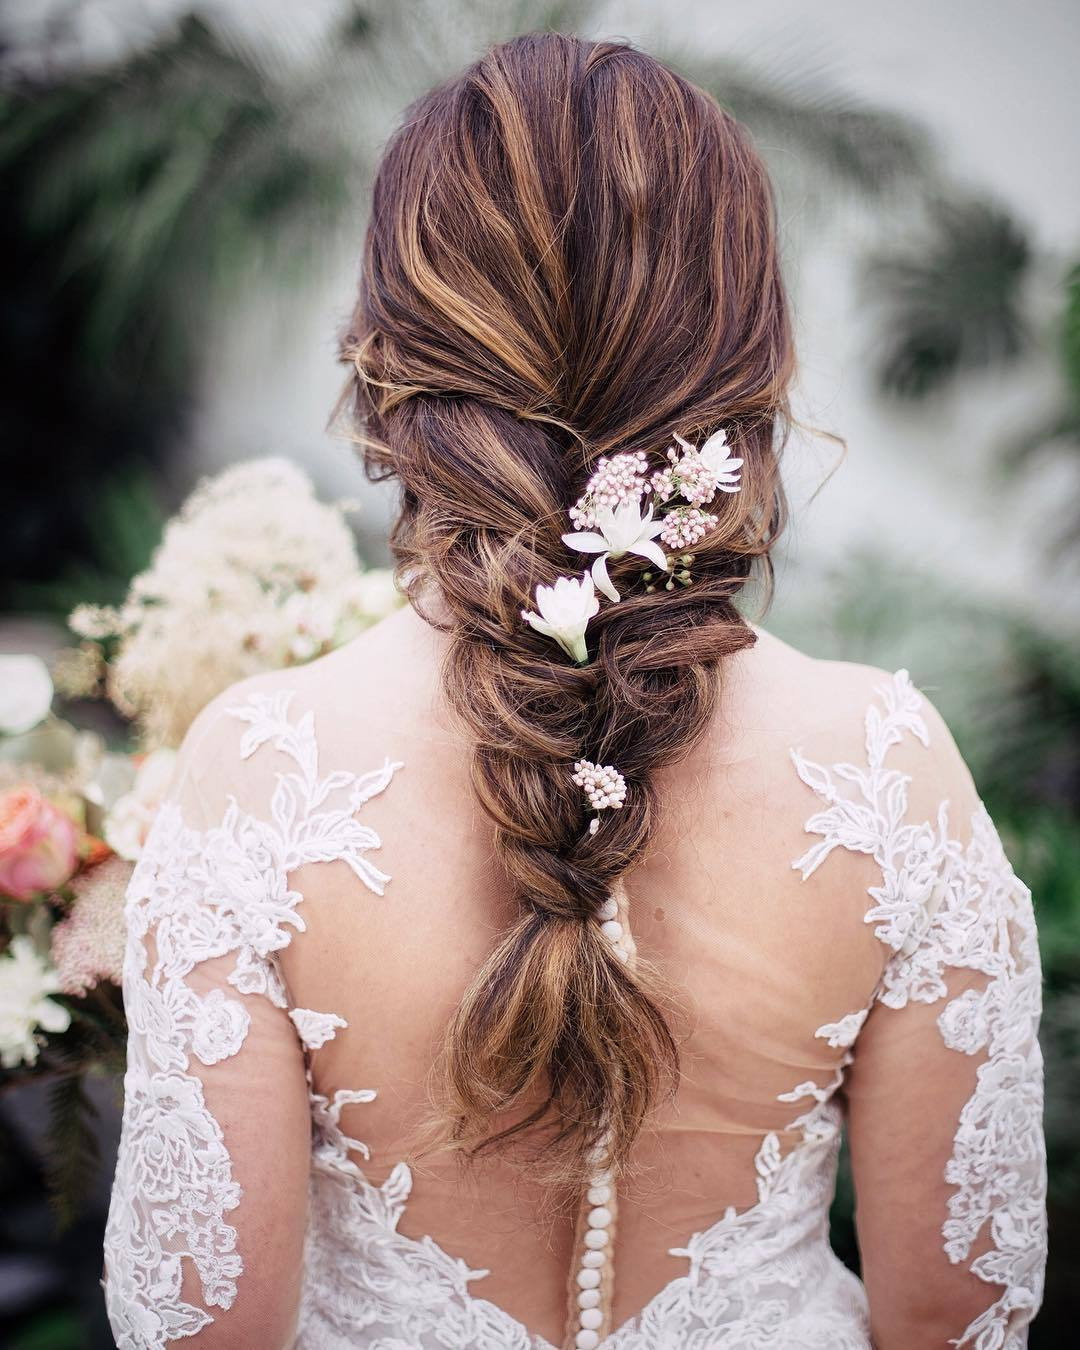 Loose Hairstyles For Wedding
 47 Stunning Wedding Hairstyles All Brides Will Love